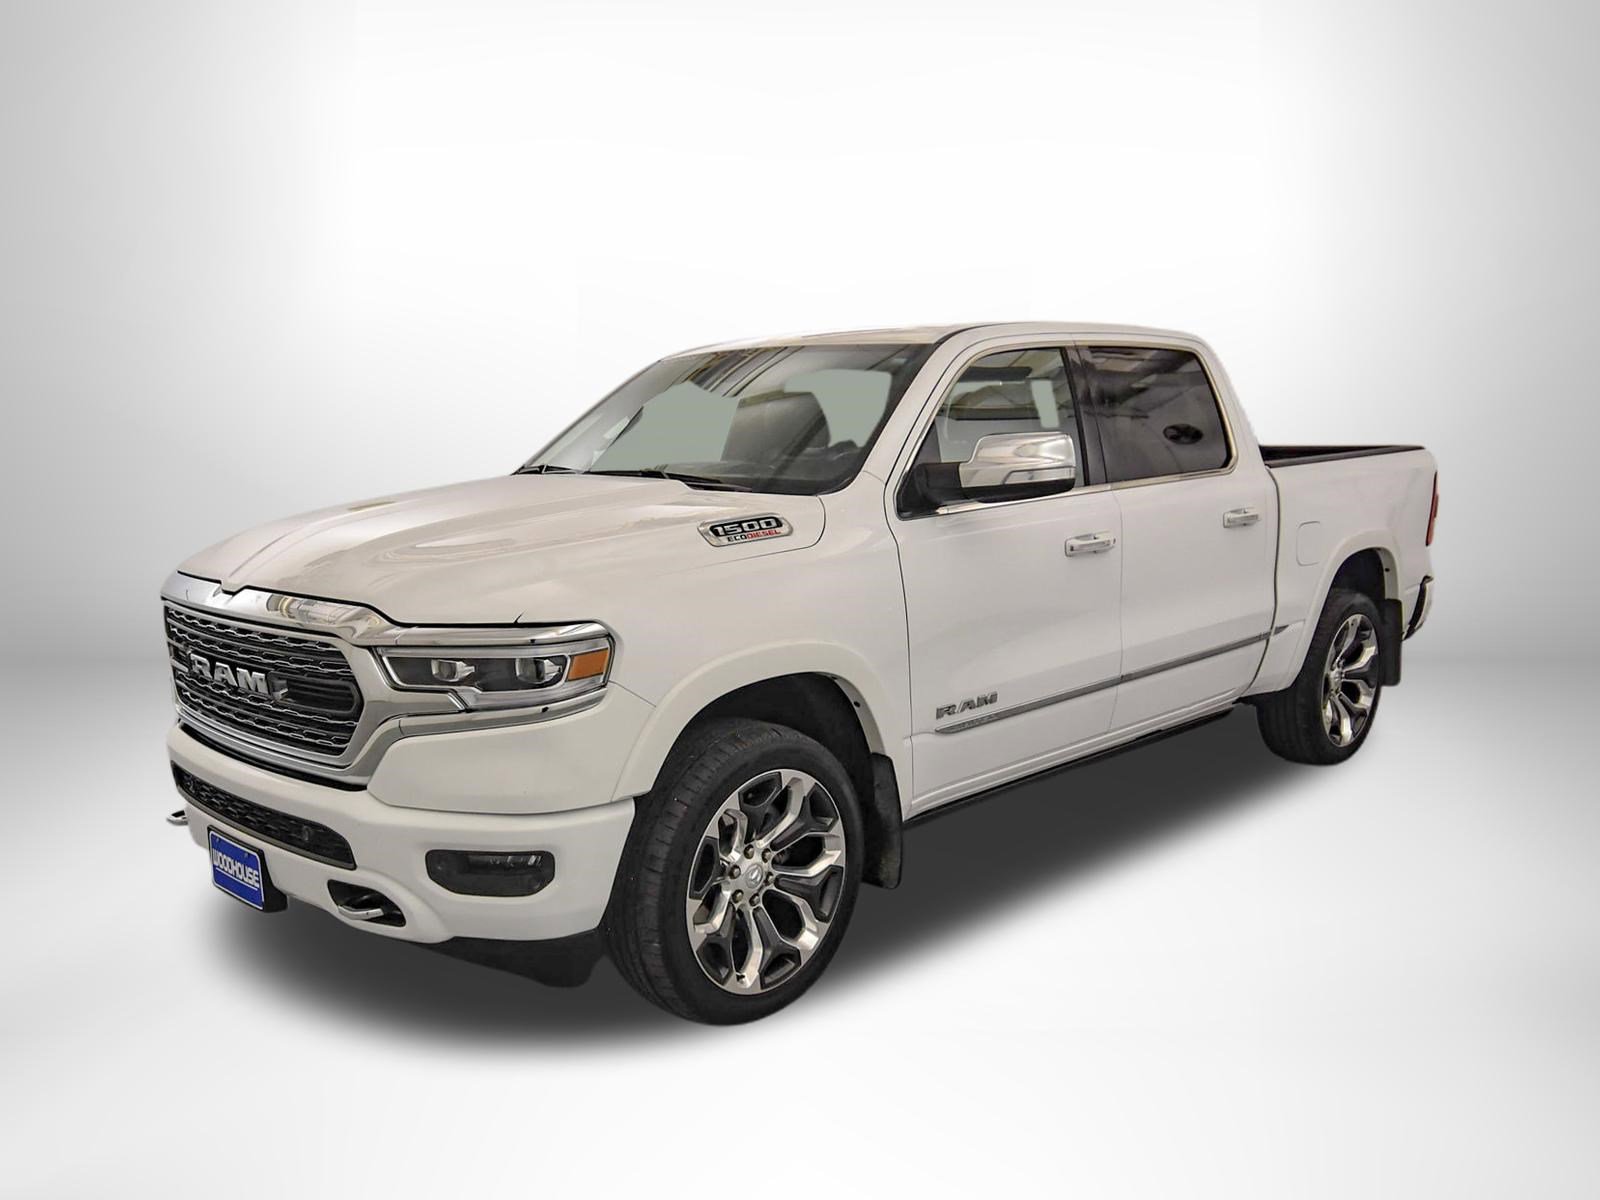 Pre-Owned 2020 Ram 1500 Limited Crew Cab in Blair #D220122A | Woodhouse  Chrysler Dodge Jeep RAM